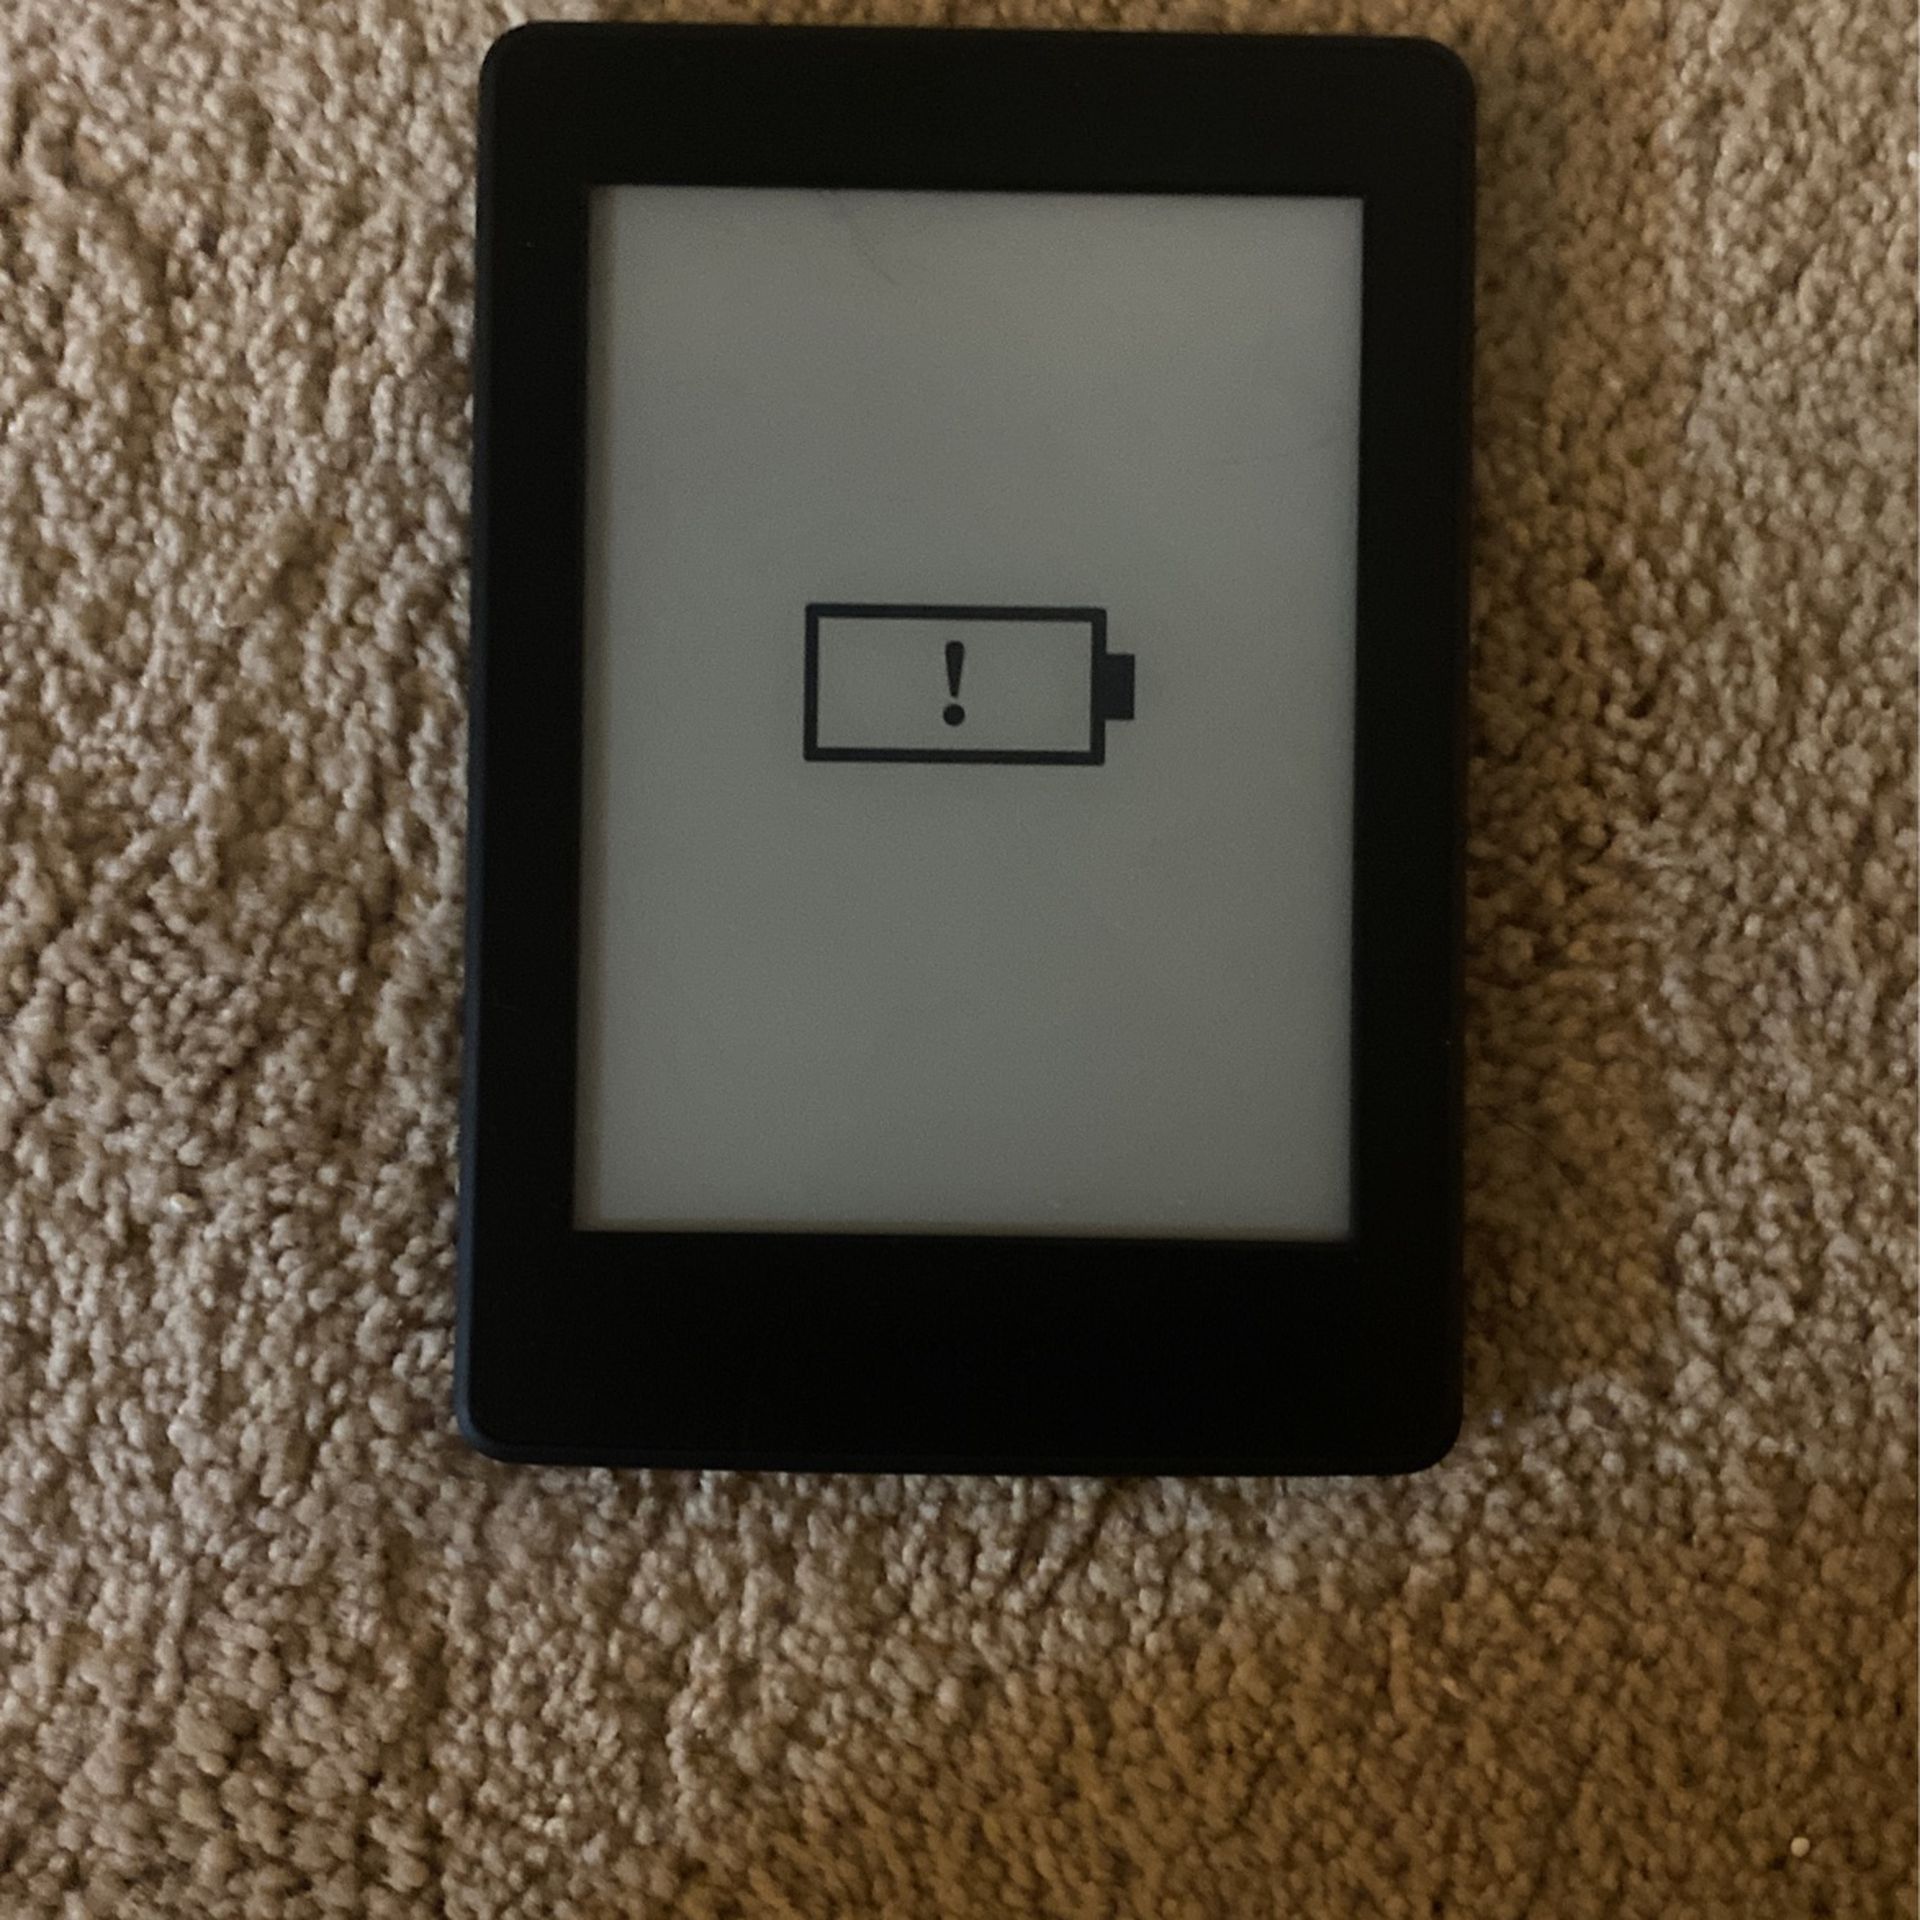 Kindle(Price Is negotiable!)